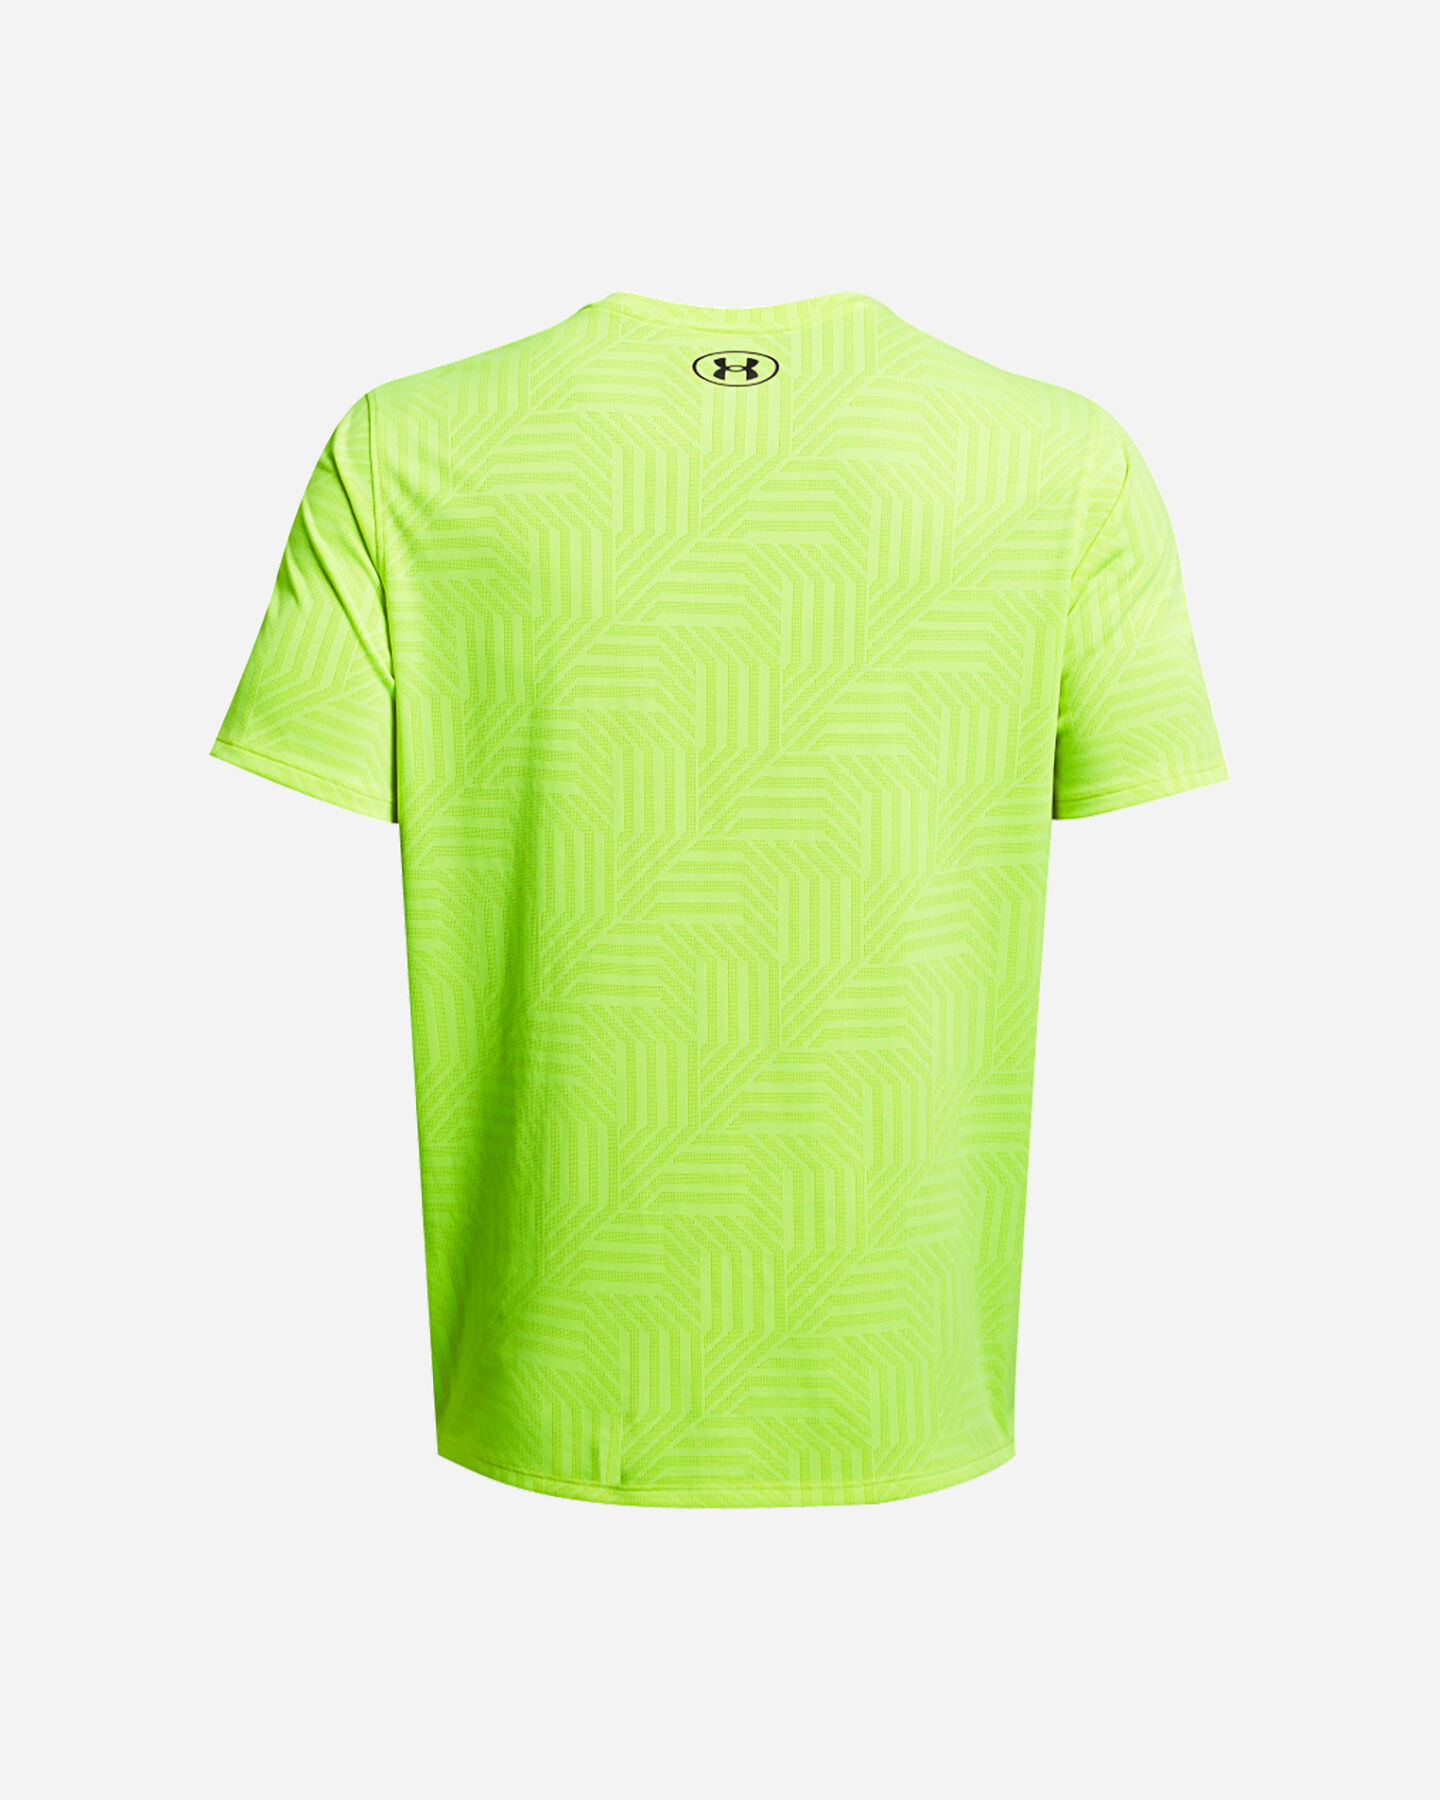  T-Shirt training UNDER ARMOUR TECH VENT GEOTESSA M S5641381|0731|XS scatto 1